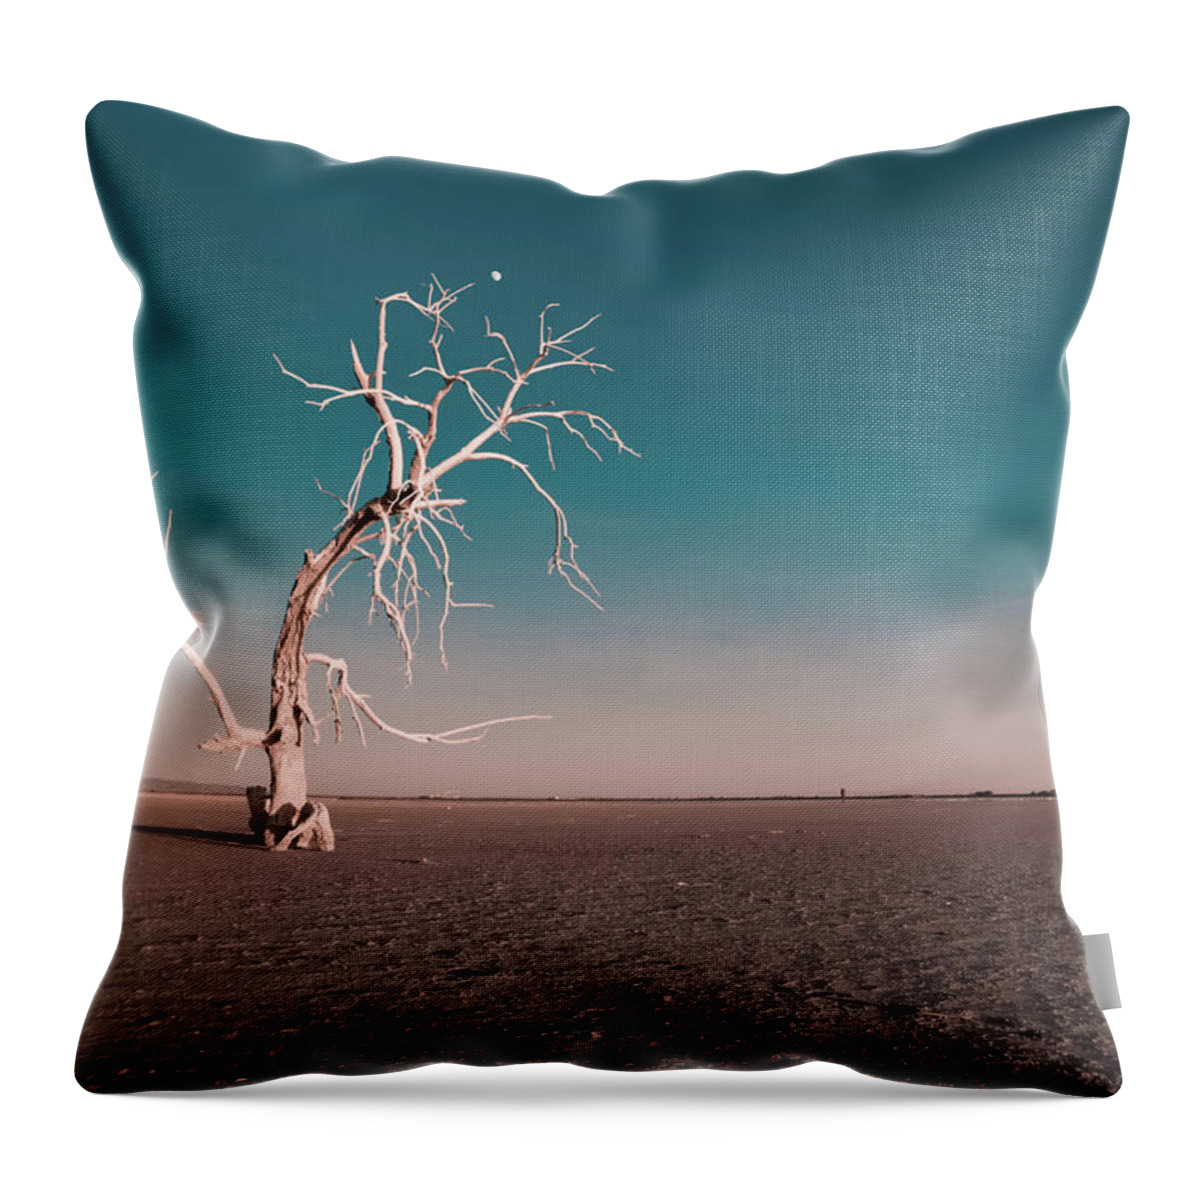 Tranquility Throw Pillow featuring the photograph Dead Tree With Moon At Salton Sea by David Teter